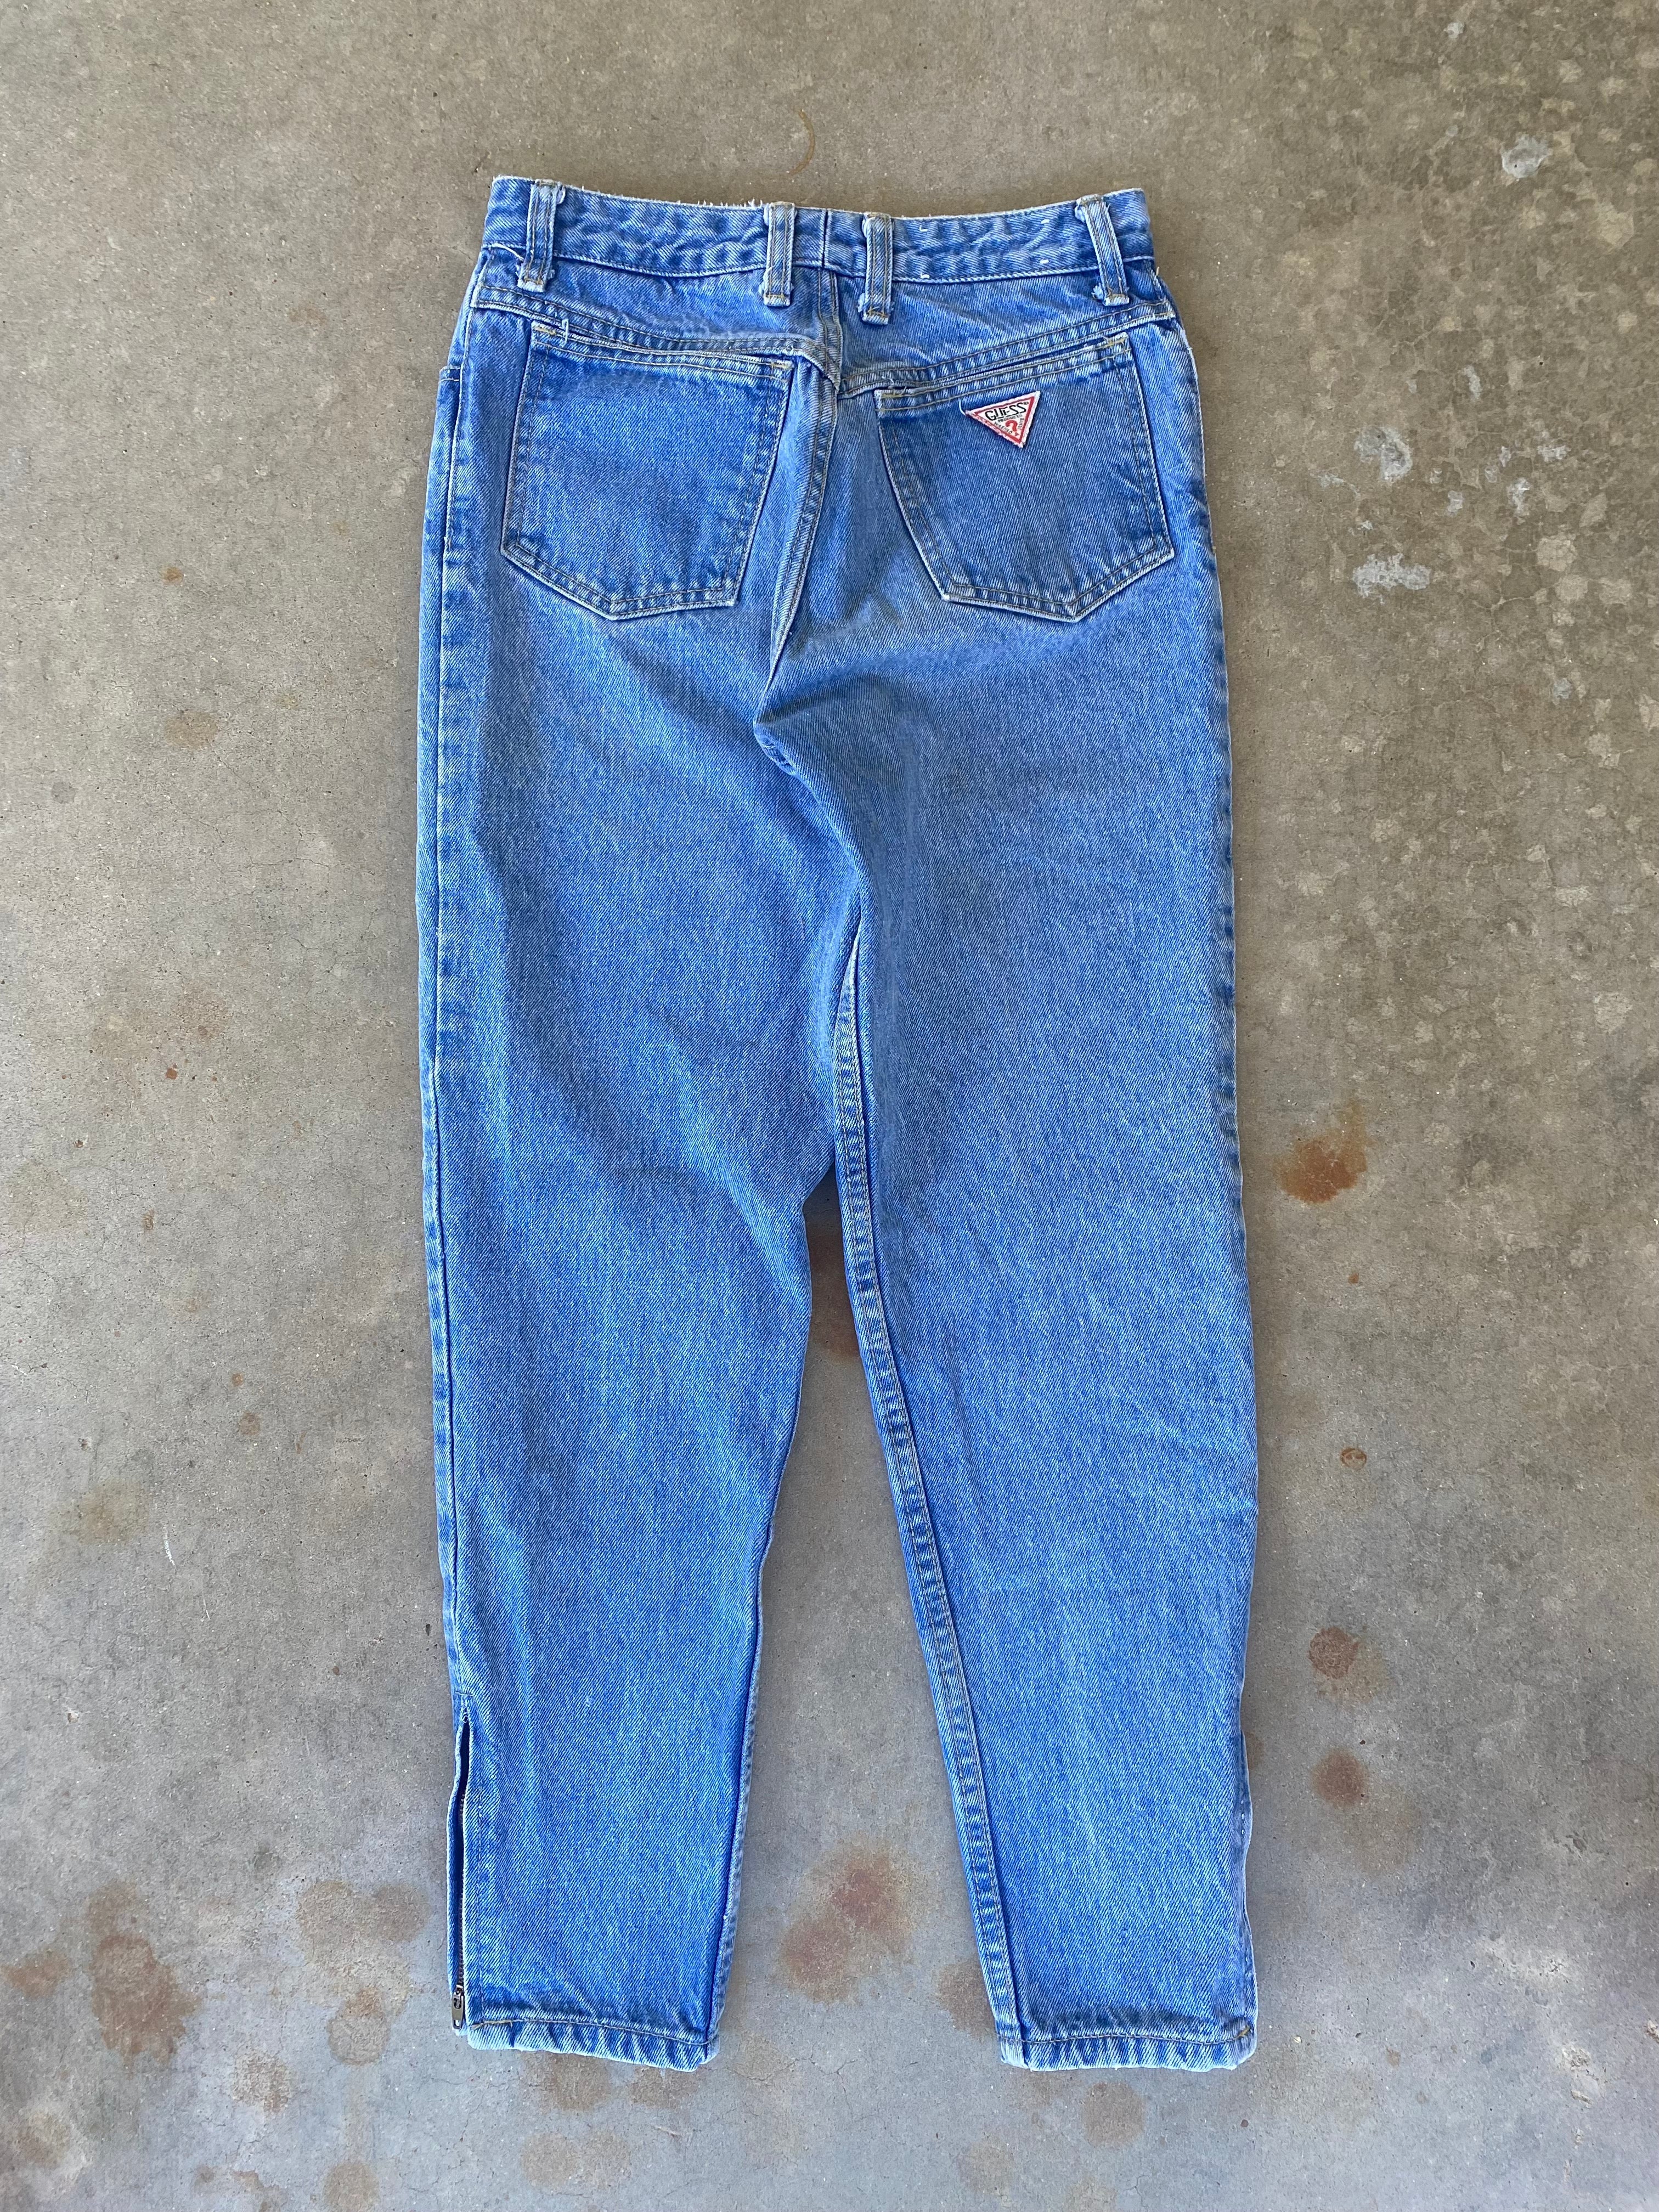 Vintage Guess Mom Jeans (28"x26.25")